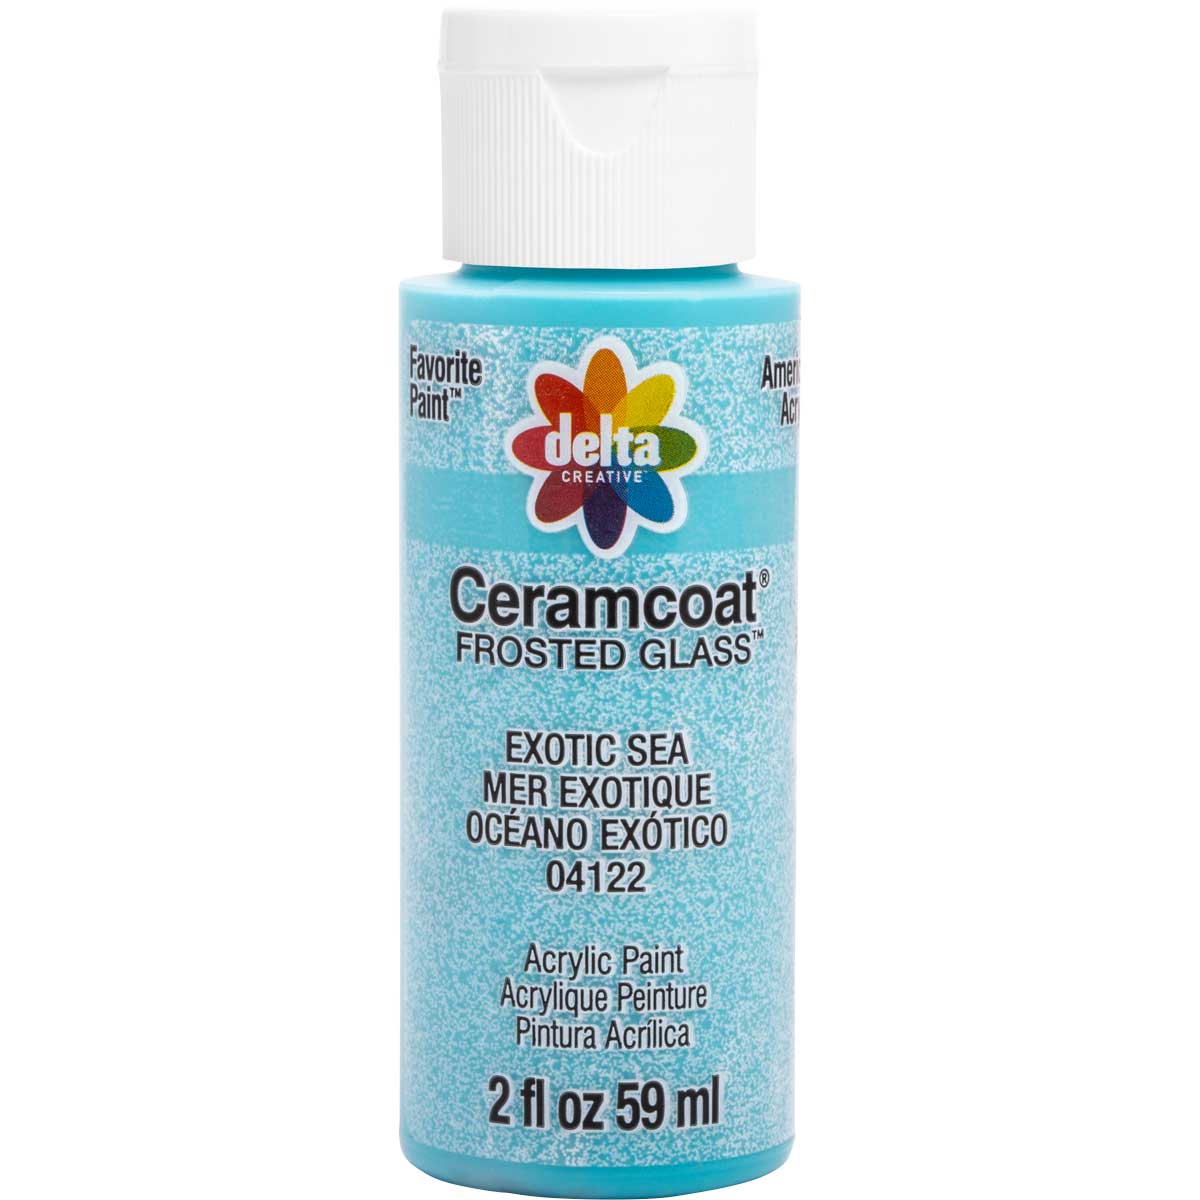 Delta Ceramcoat ® Frosted Glass Paint - Exotic Sea, 2 oz. - 04122